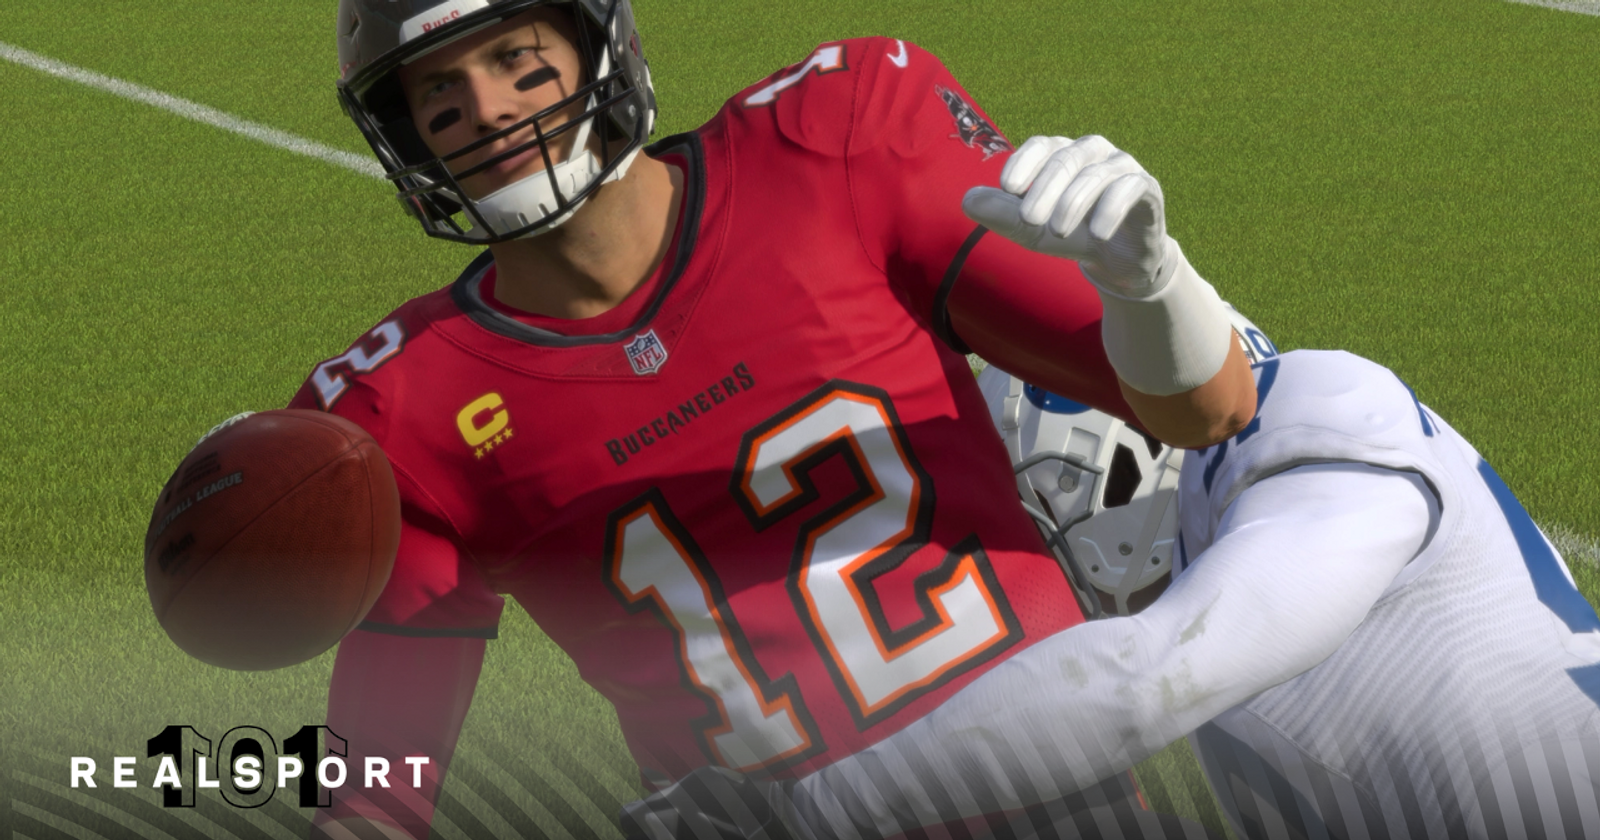 Does your Madden 21 progress transfer from PS4 to PS5?